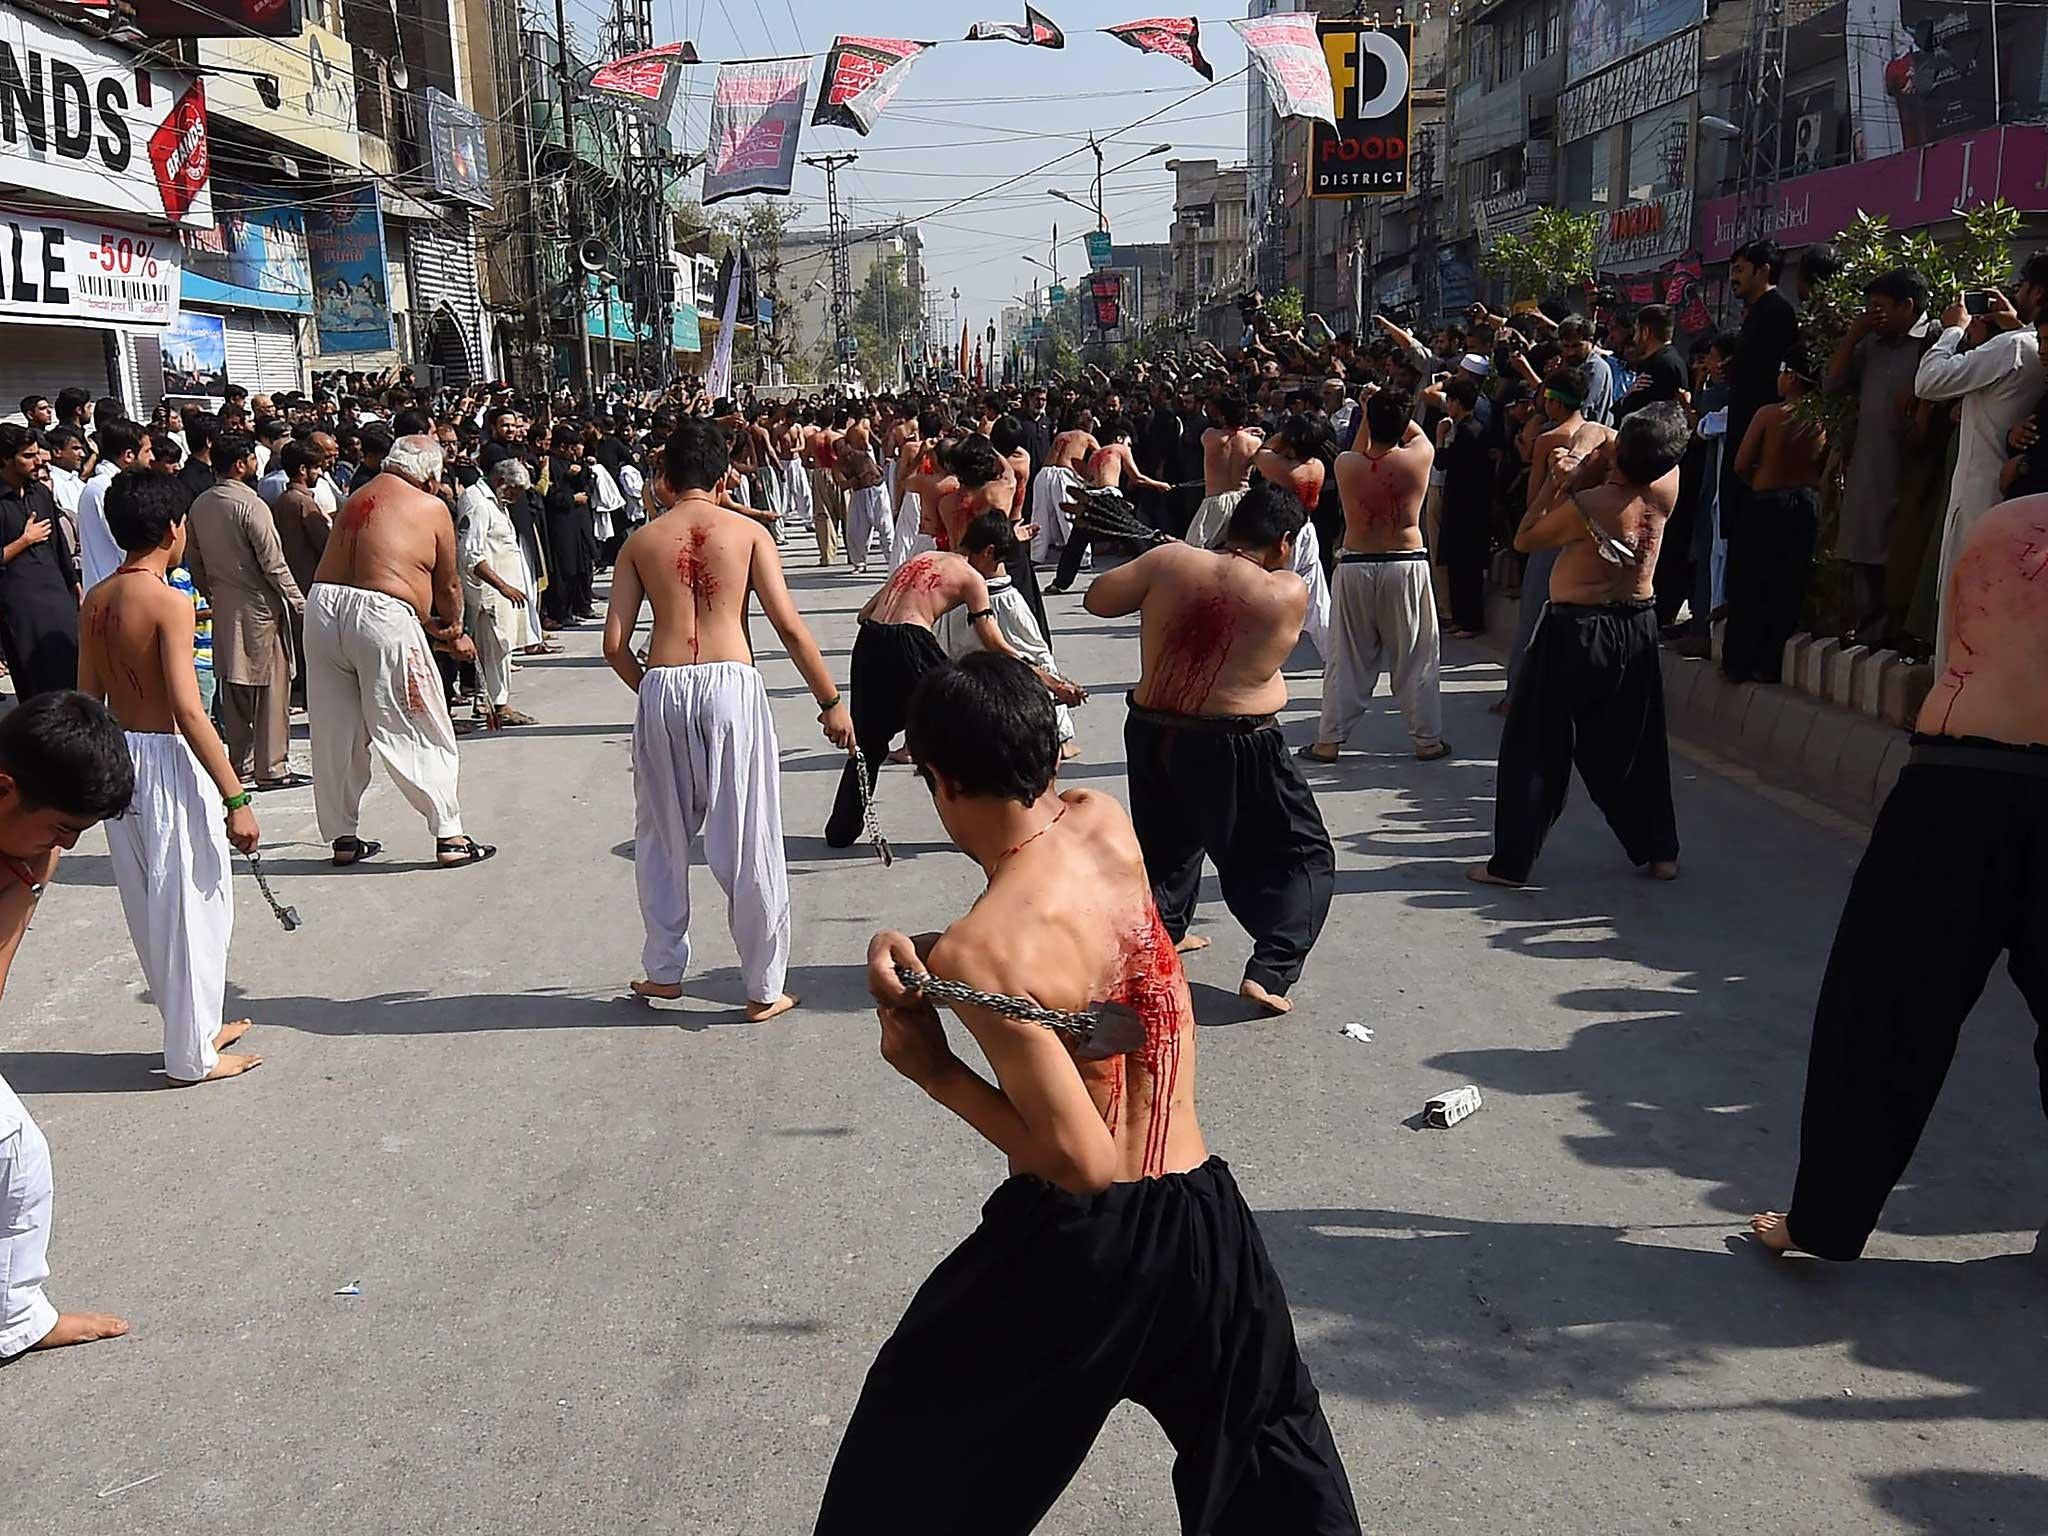 Pakistani Shiite Muslims flagellate themselves during the Ashura procession in Peshawar. The Islamic month of Muharram marks the seven-century martyrdom of Prophet Mohammad's grandson Imam Hussein who was killed in battle in Karbala in Iraq in 680 AD